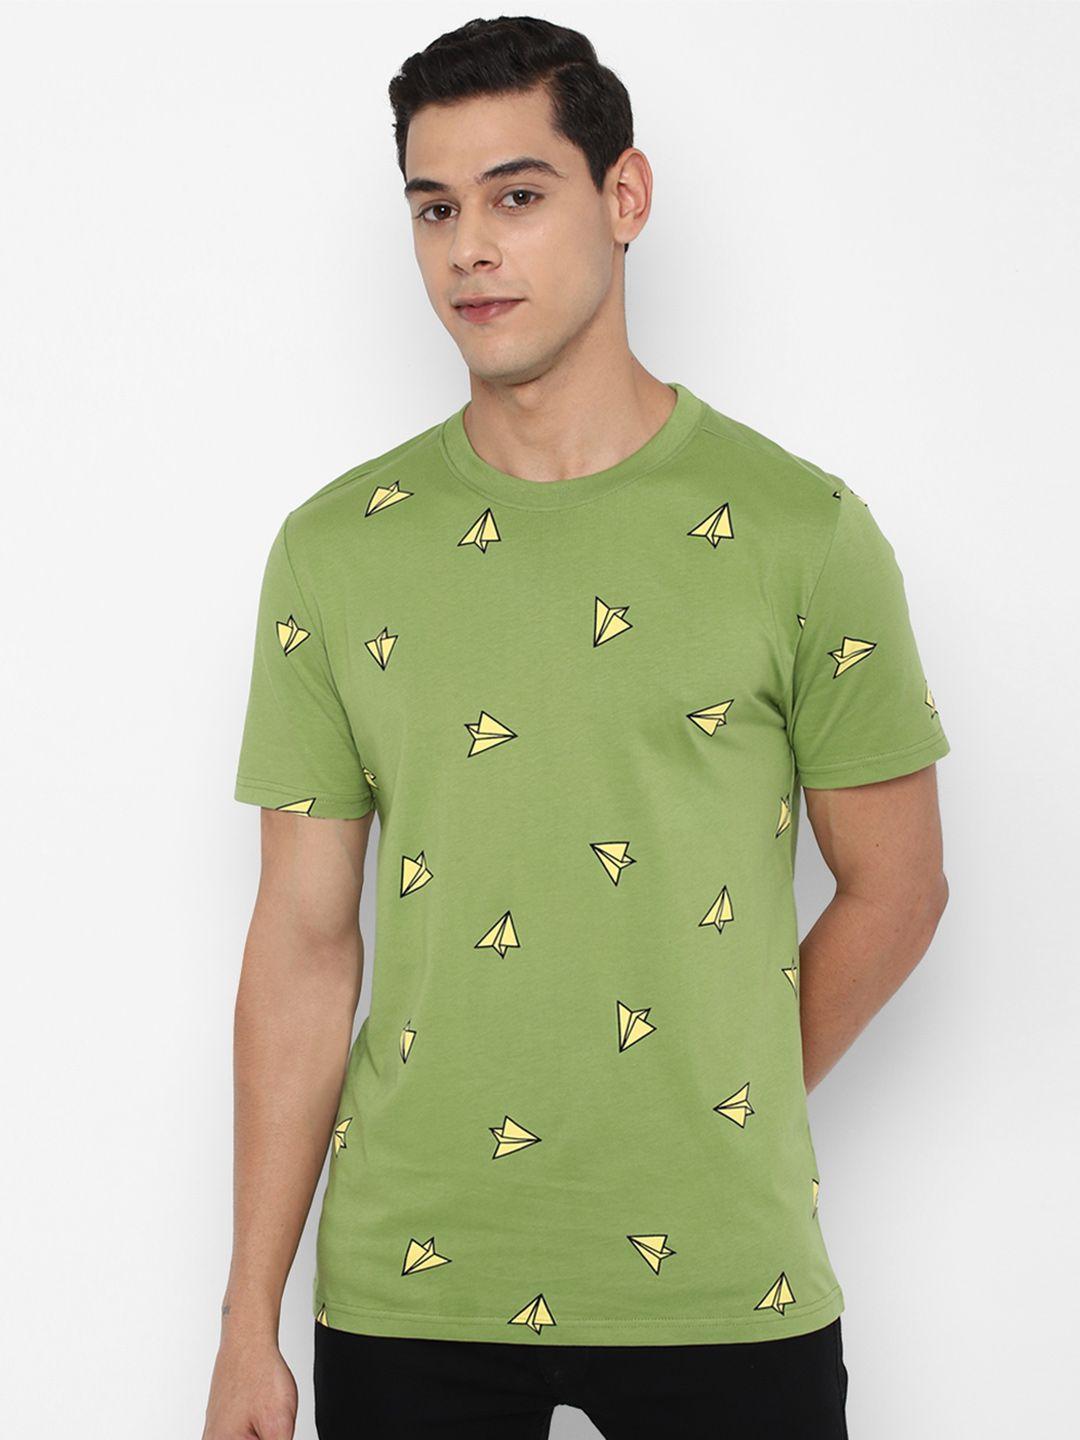 forever-21-men-green-&-yellow-printed-cotton-t-shirt